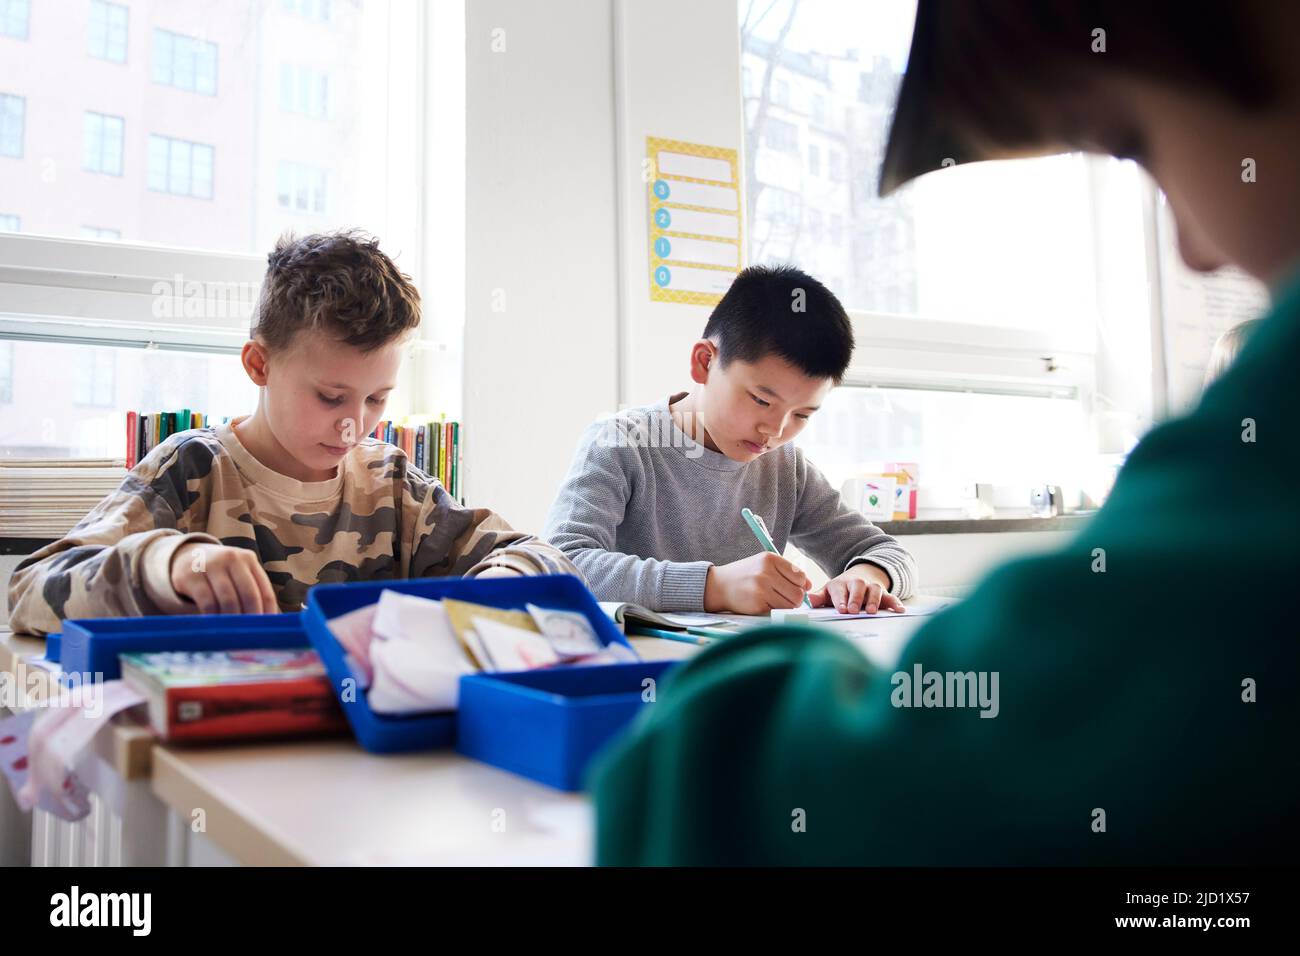 Boy students sitting in classroom Stock Photo